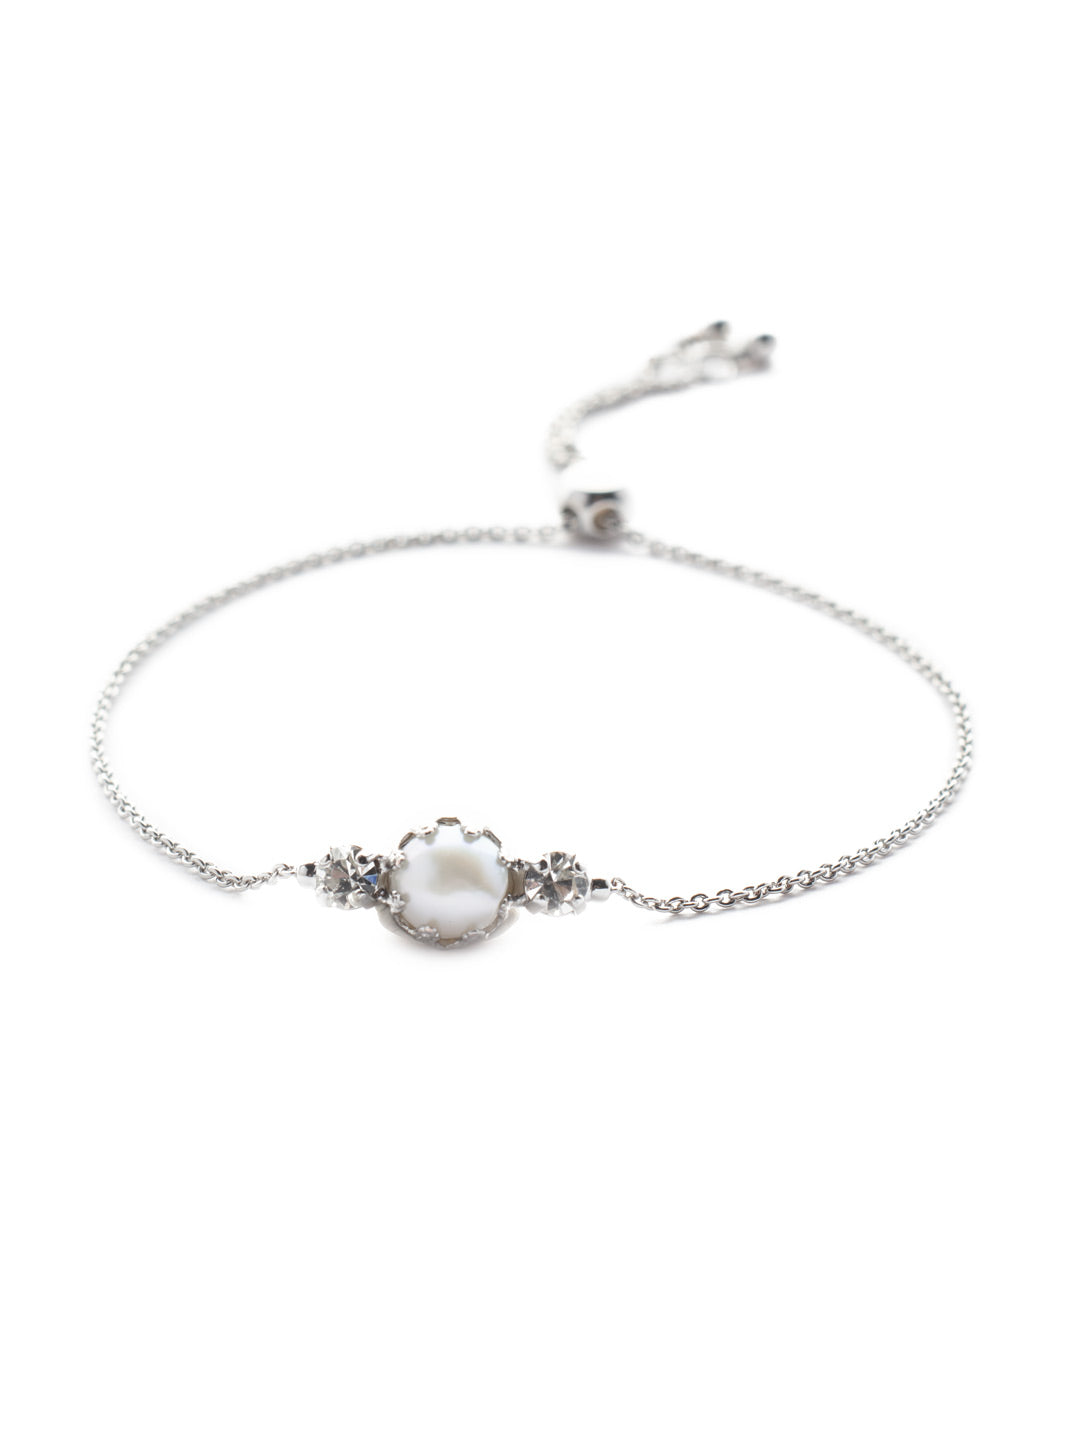 Kit Slider Bracelet - BEV166PDCRY - The Kit Slider Bracelet features a single freshwater pearl nestled between two crystals on an adjustable slider chain. The dainty design makes it perfect for layering! From Sorrelli's Crystal collection in our Palladium finish.